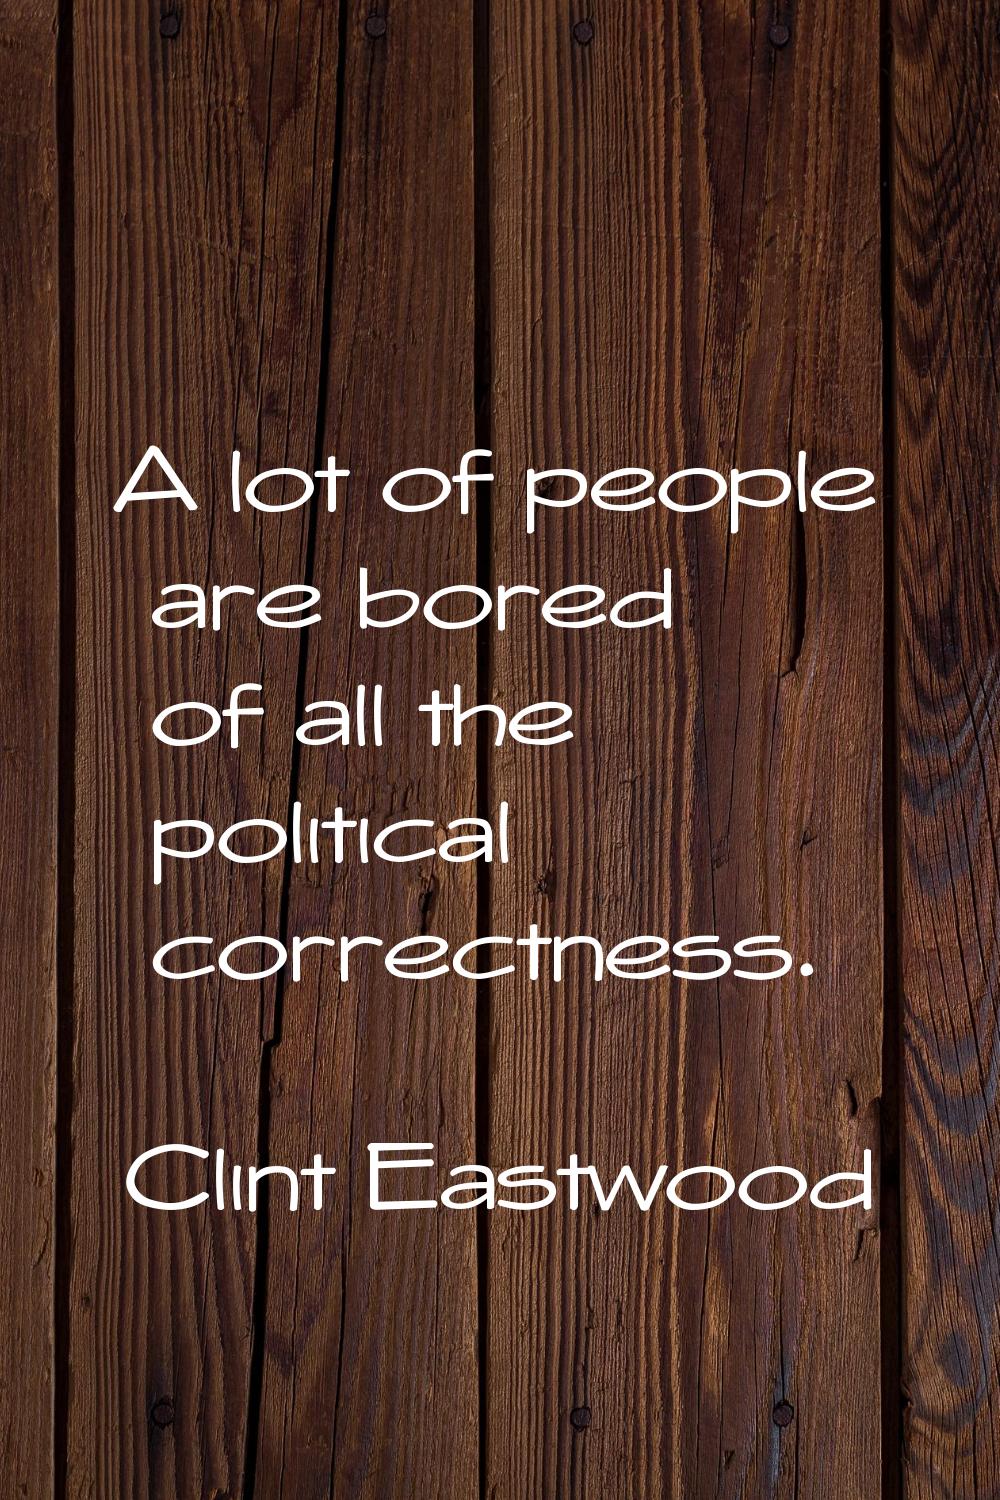 A lot of people are bored of all the political correctness.